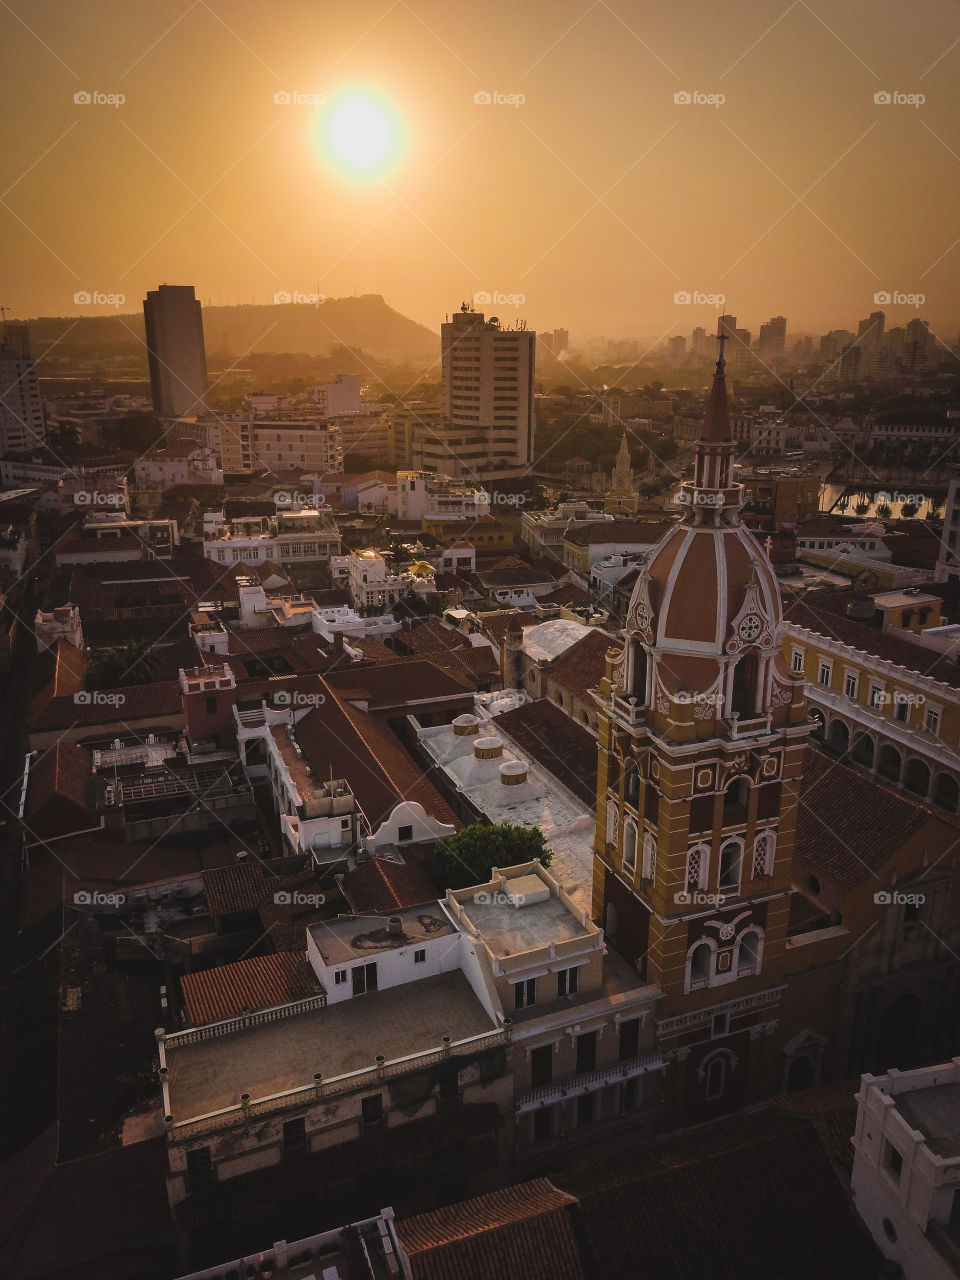 Cartagena Colombia at sunrise, there are not many shots of cartagena in that beautiful light